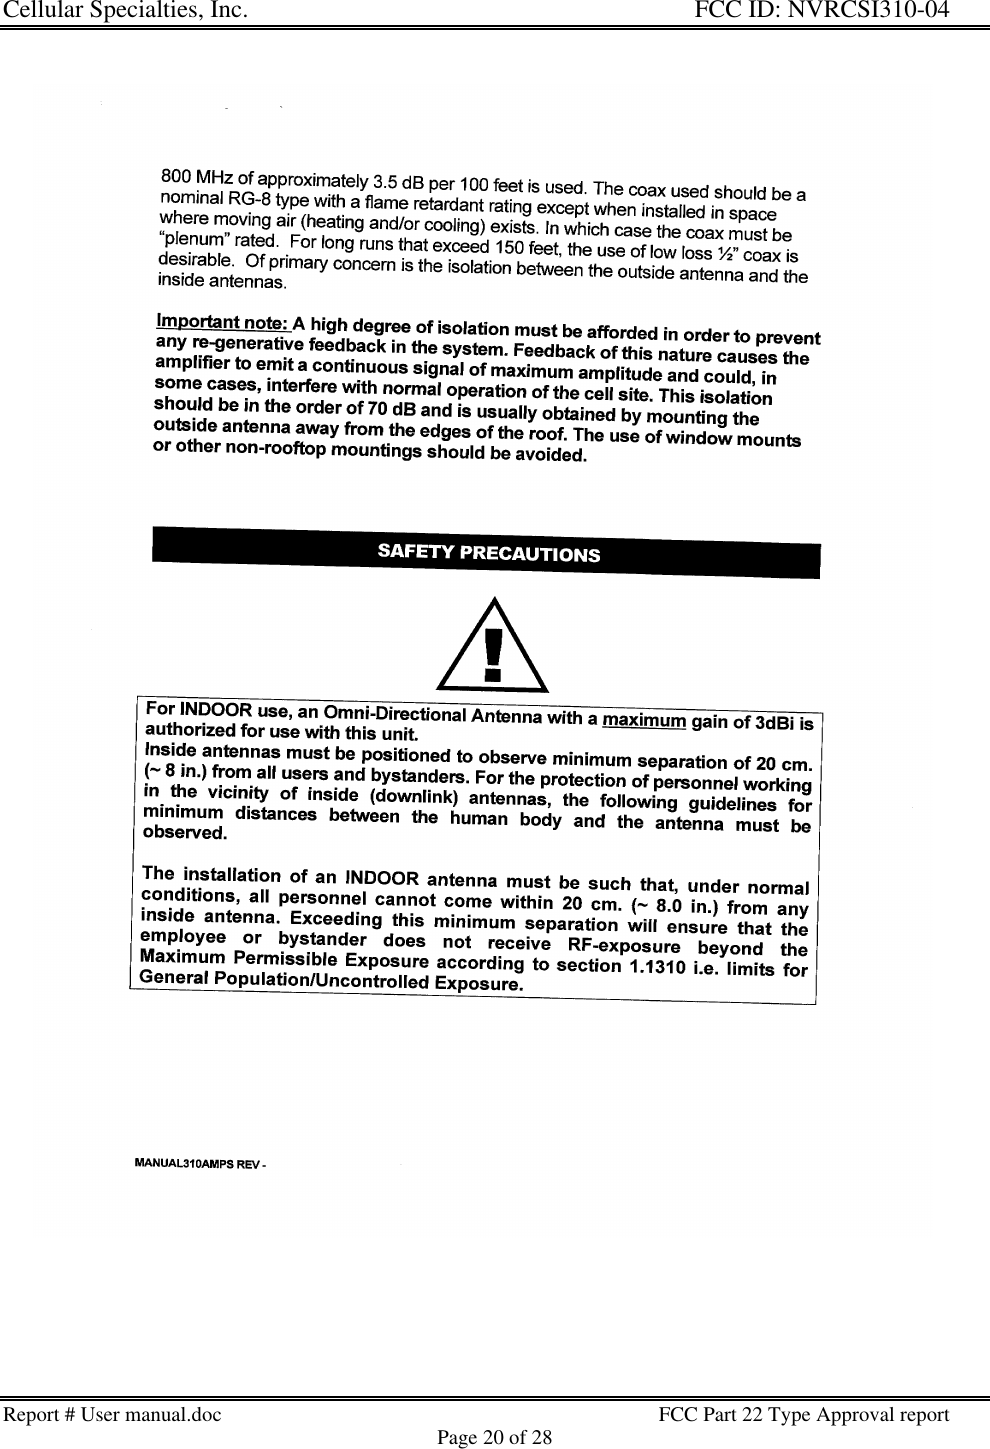 Cellular Specialties, Inc. FCC ID: NVRCSI310-04Report # User manual.doc FCC Part 22 Type Approval reportPage 20 of 28